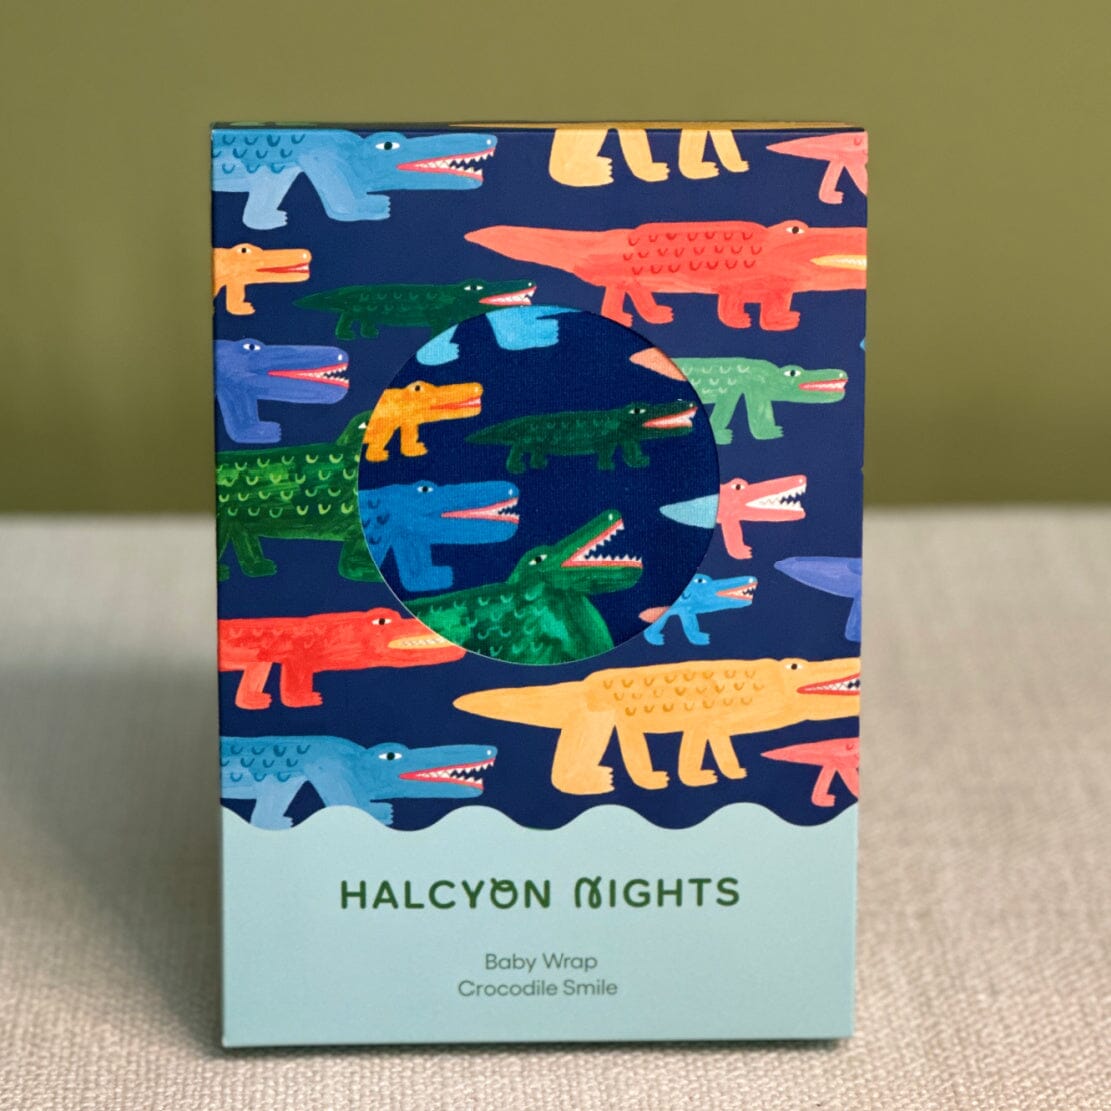 Same day new baby gift delivery | Australia-wide baby gift delivery | Buy Halcyon Nights Online